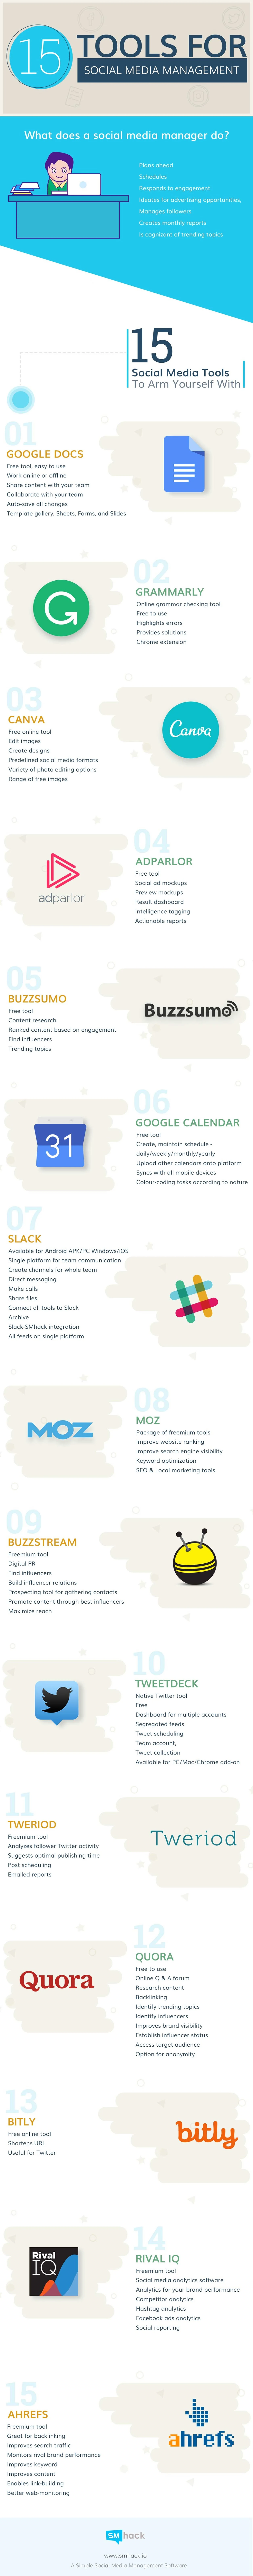 15 Top Tools for Social Media Managers to Save Time - #Infographic